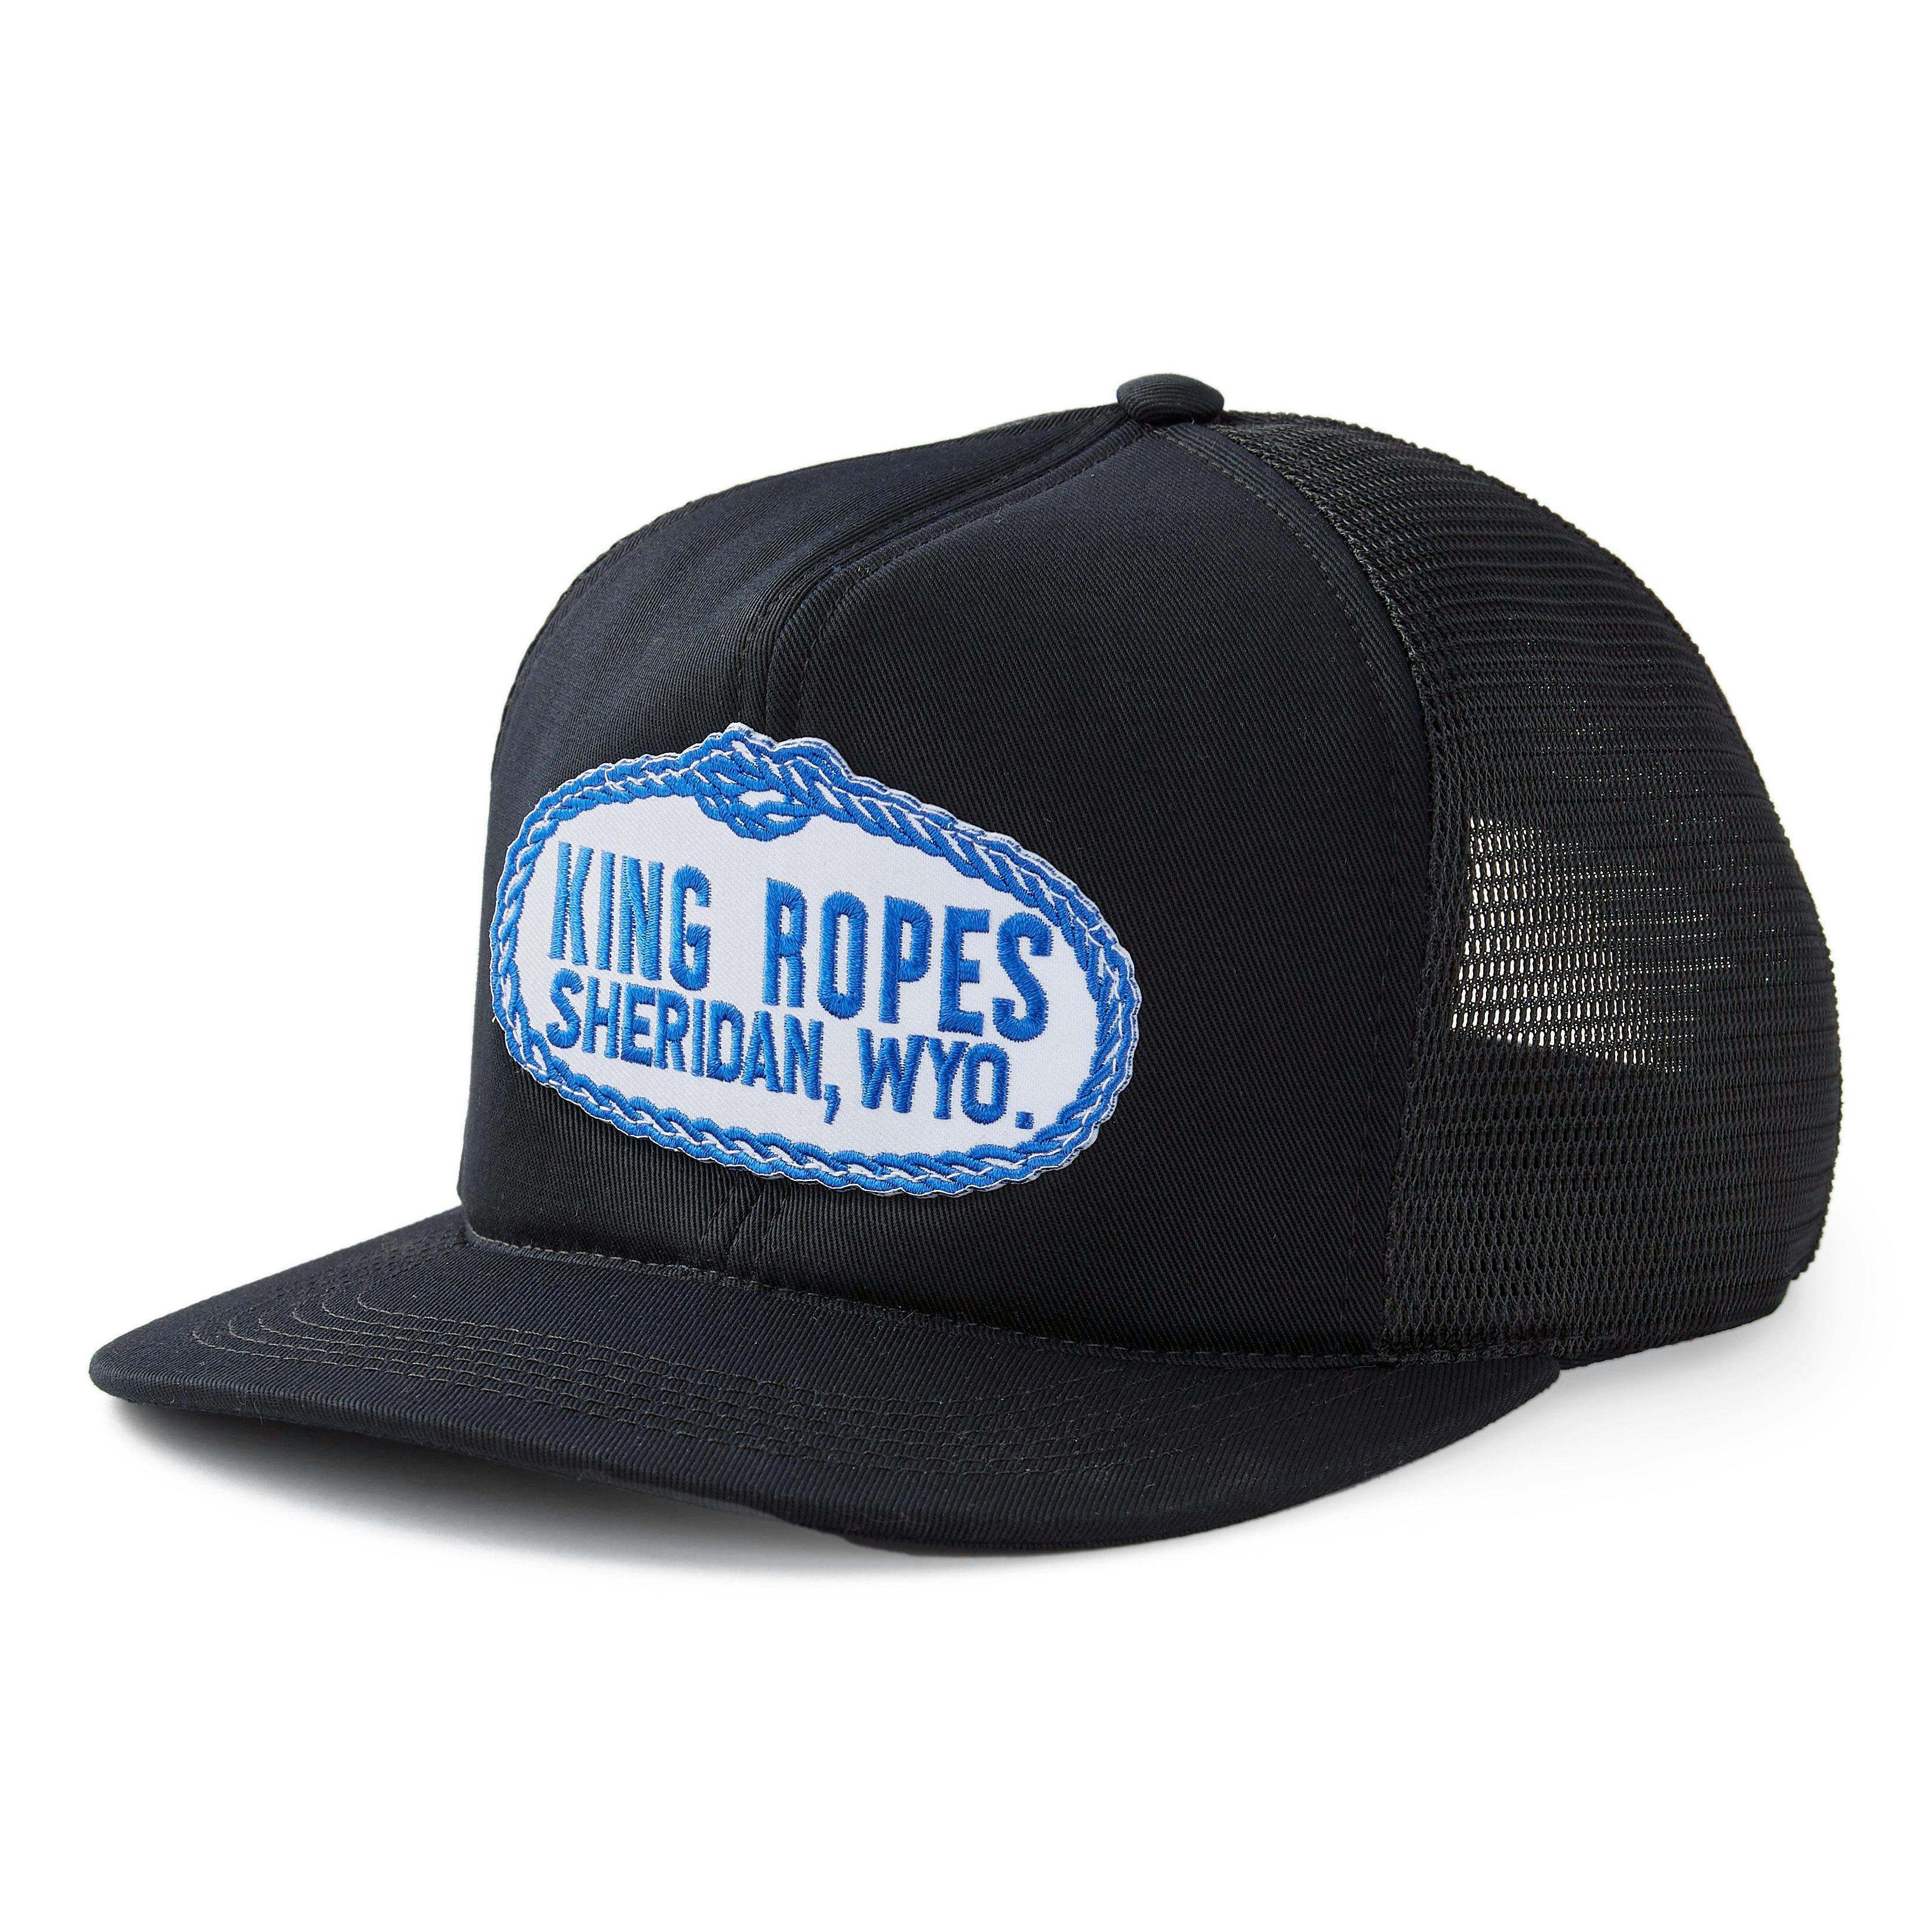 King Ropes Patch Trucker Hat